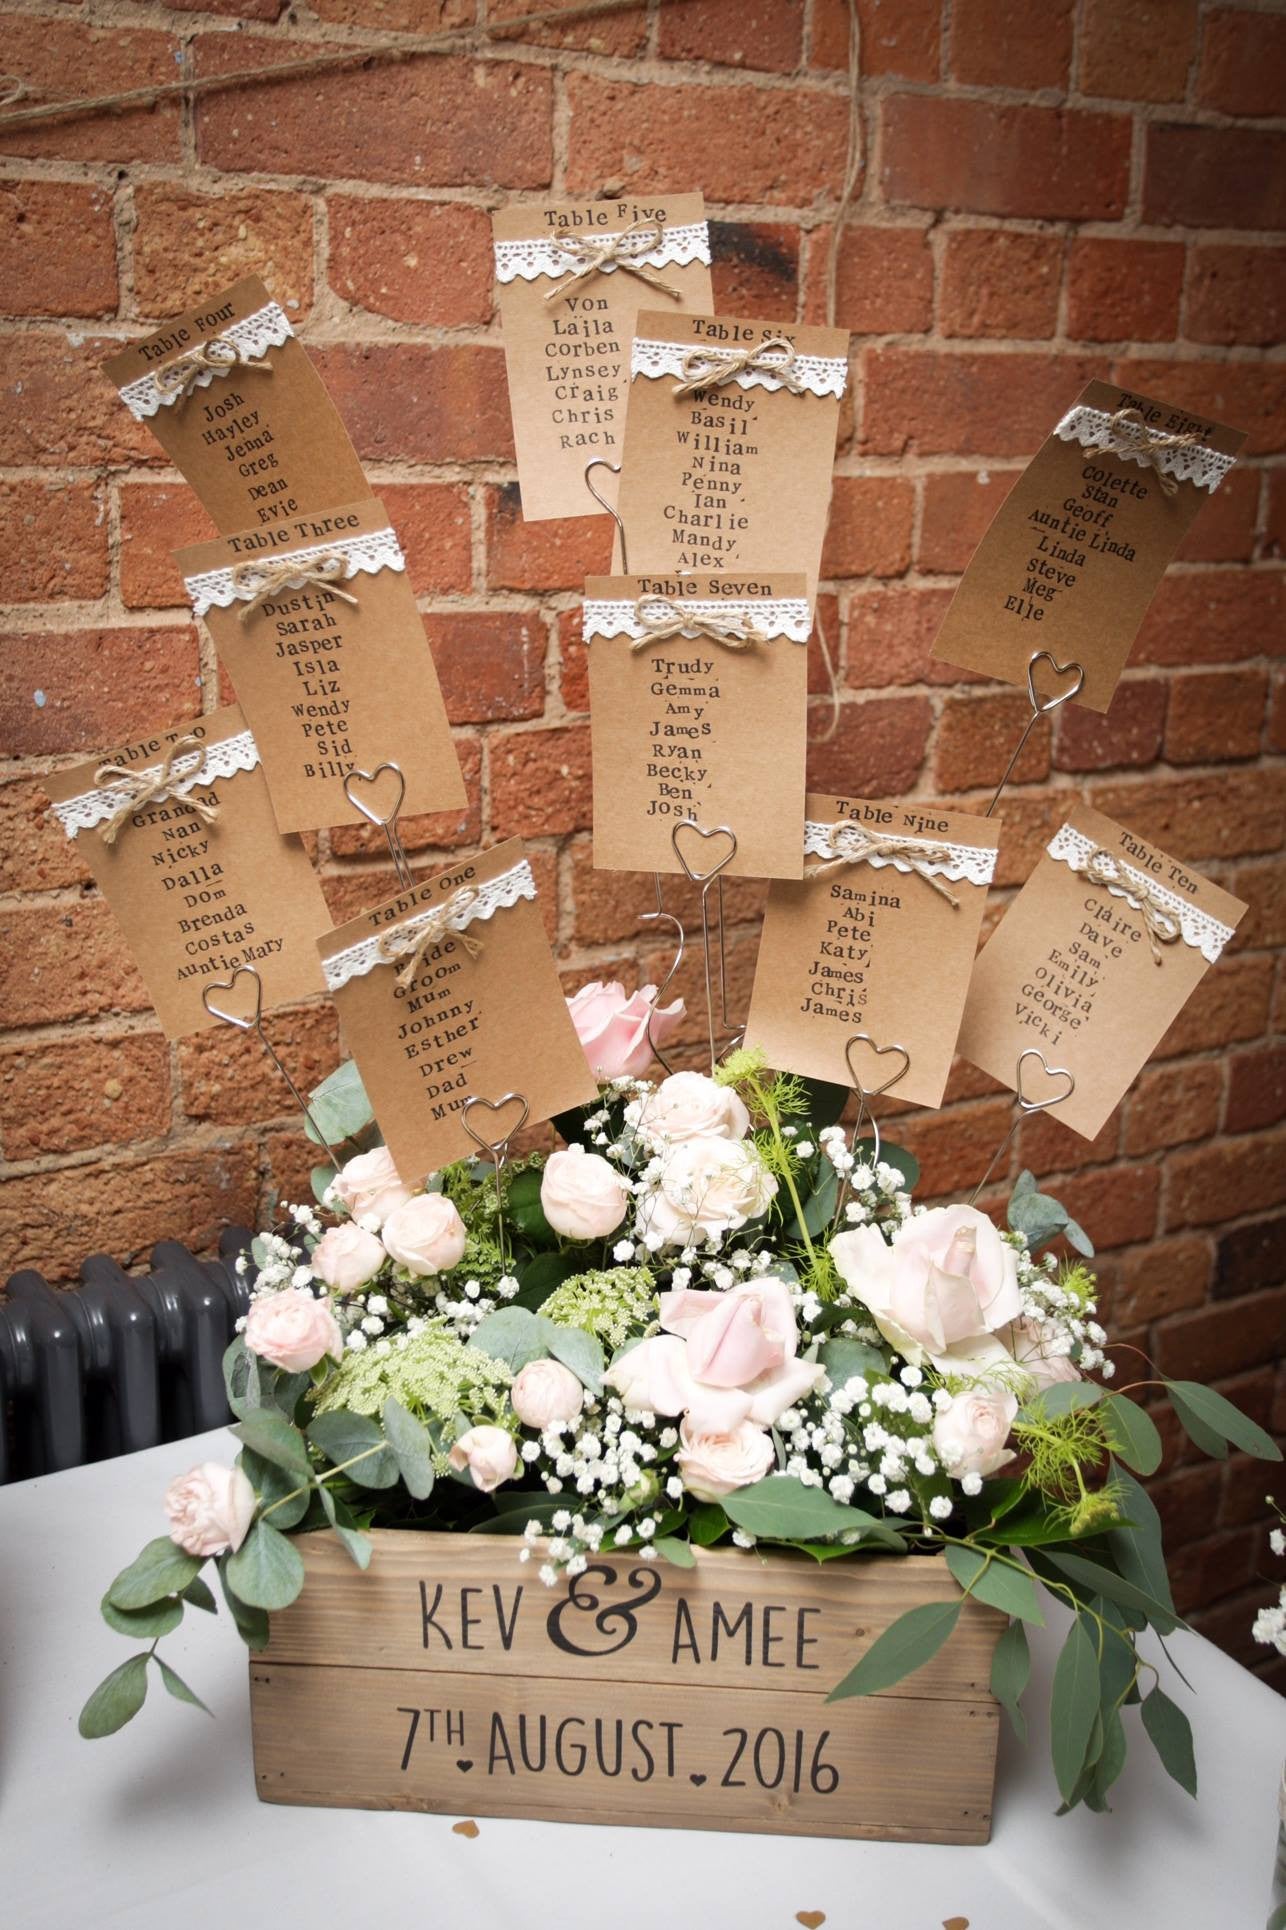 Wooden crate table seating arrangement with pink Roses, white Gypsophila and foliage.